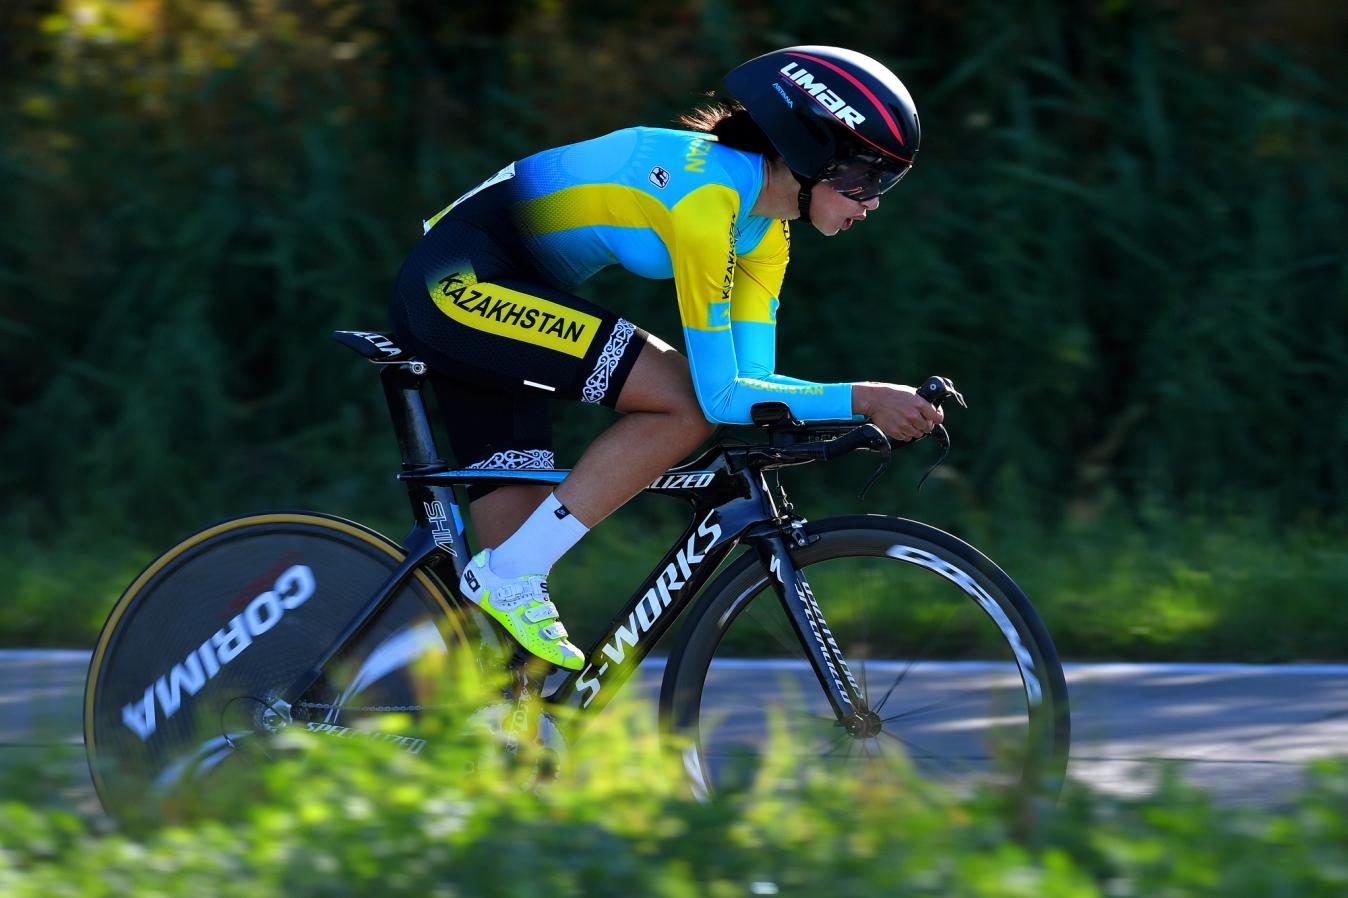 Bota Batyrbekova competes at the UCI Road World Championships in 2021